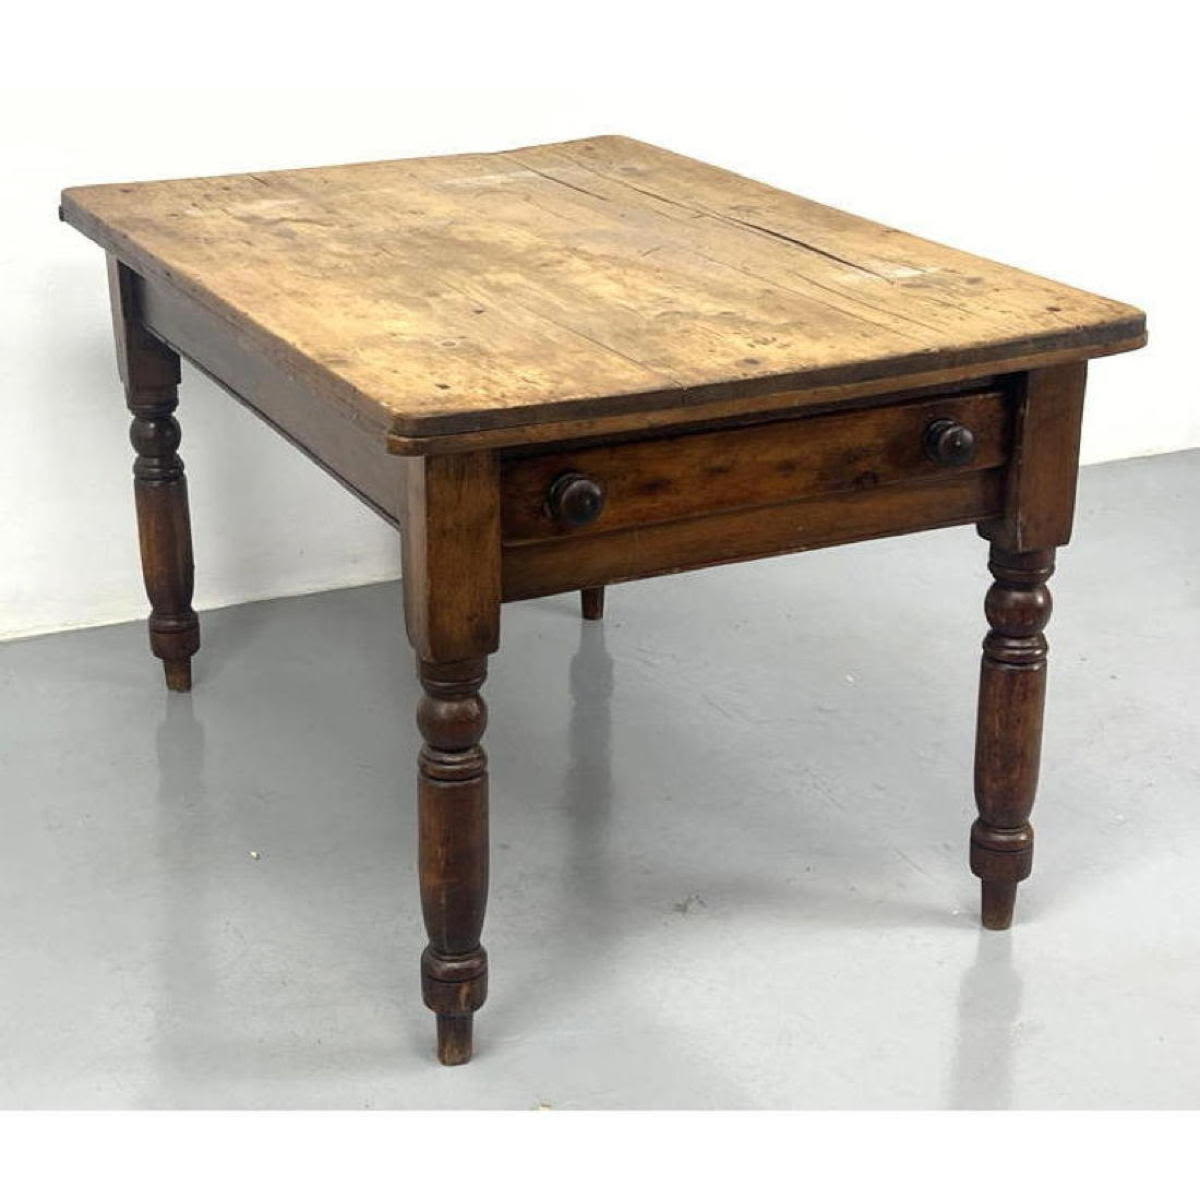 Country Antique Wood Desk with